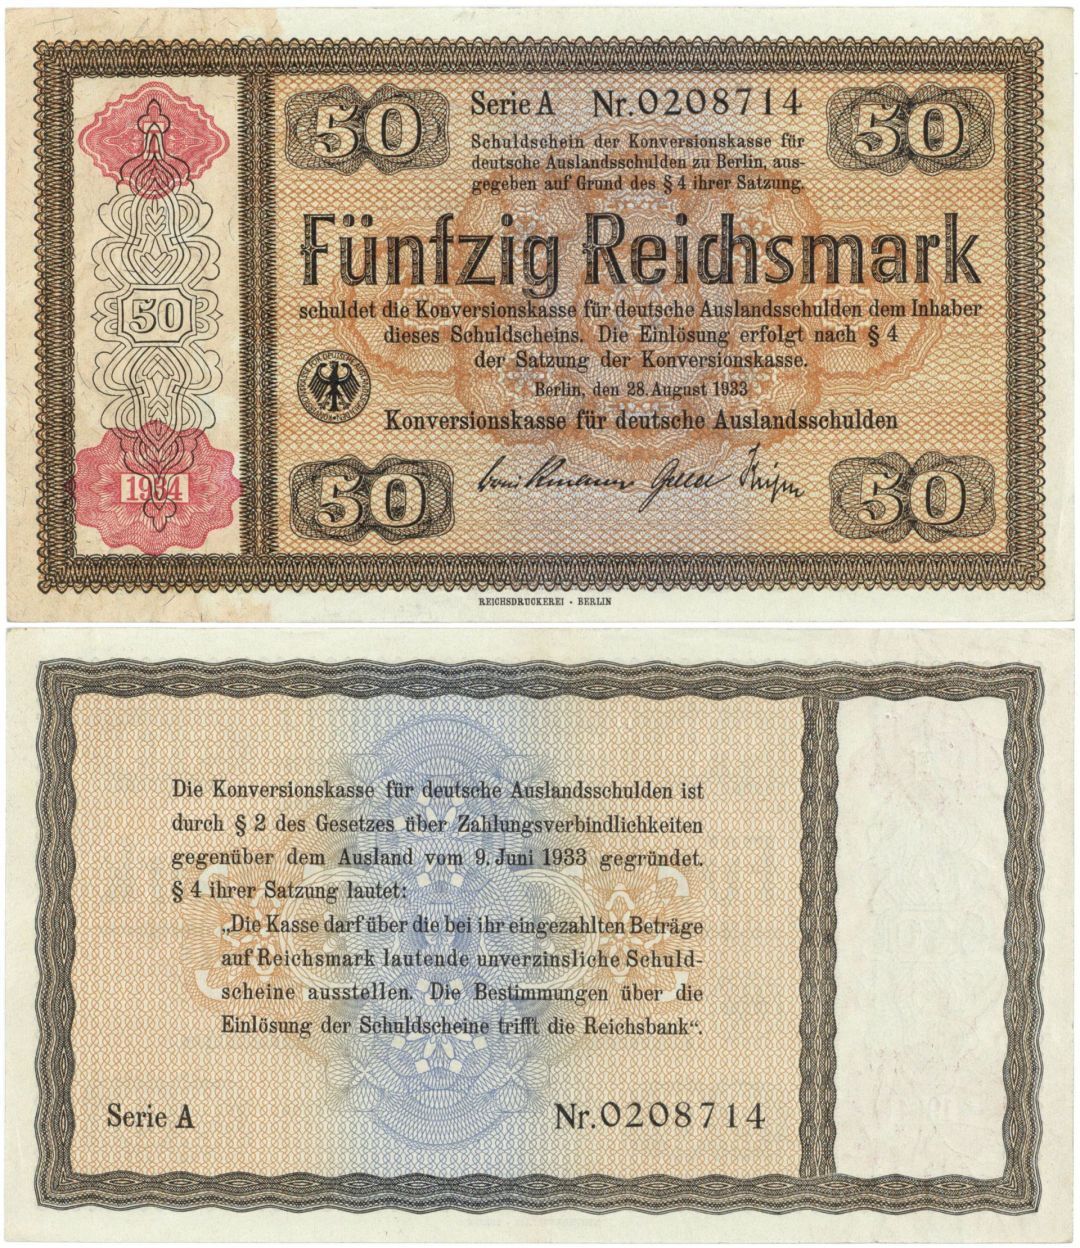 Germany - 50 German Reichsmark - P-211 - 1933 dated Foreign Paper Money - Paper 